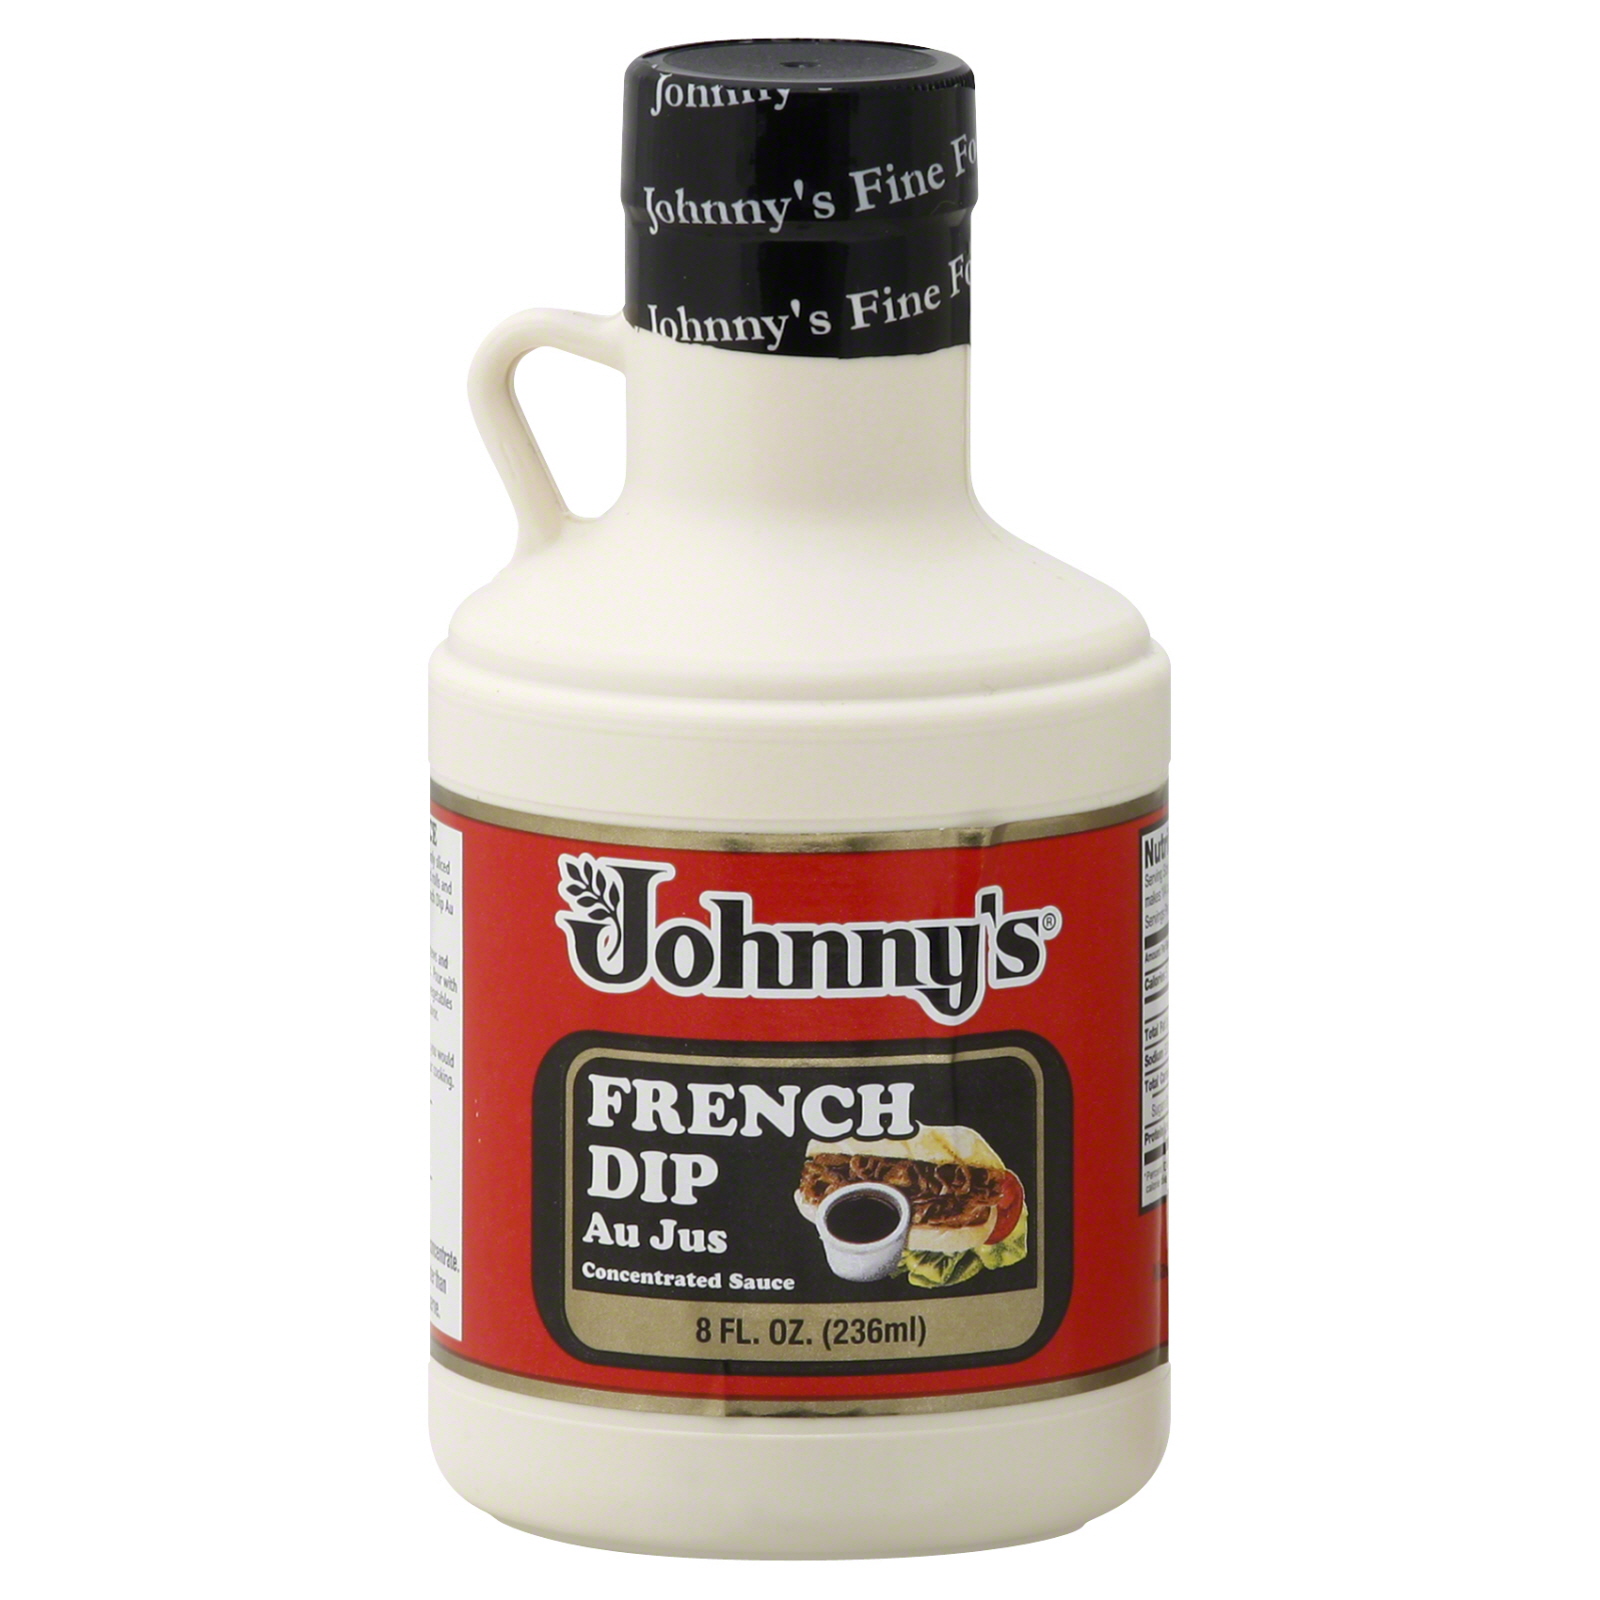 Johnny's French Dip, Au Jus Sauce, Concentrated, 8 fl oz (236 ml)